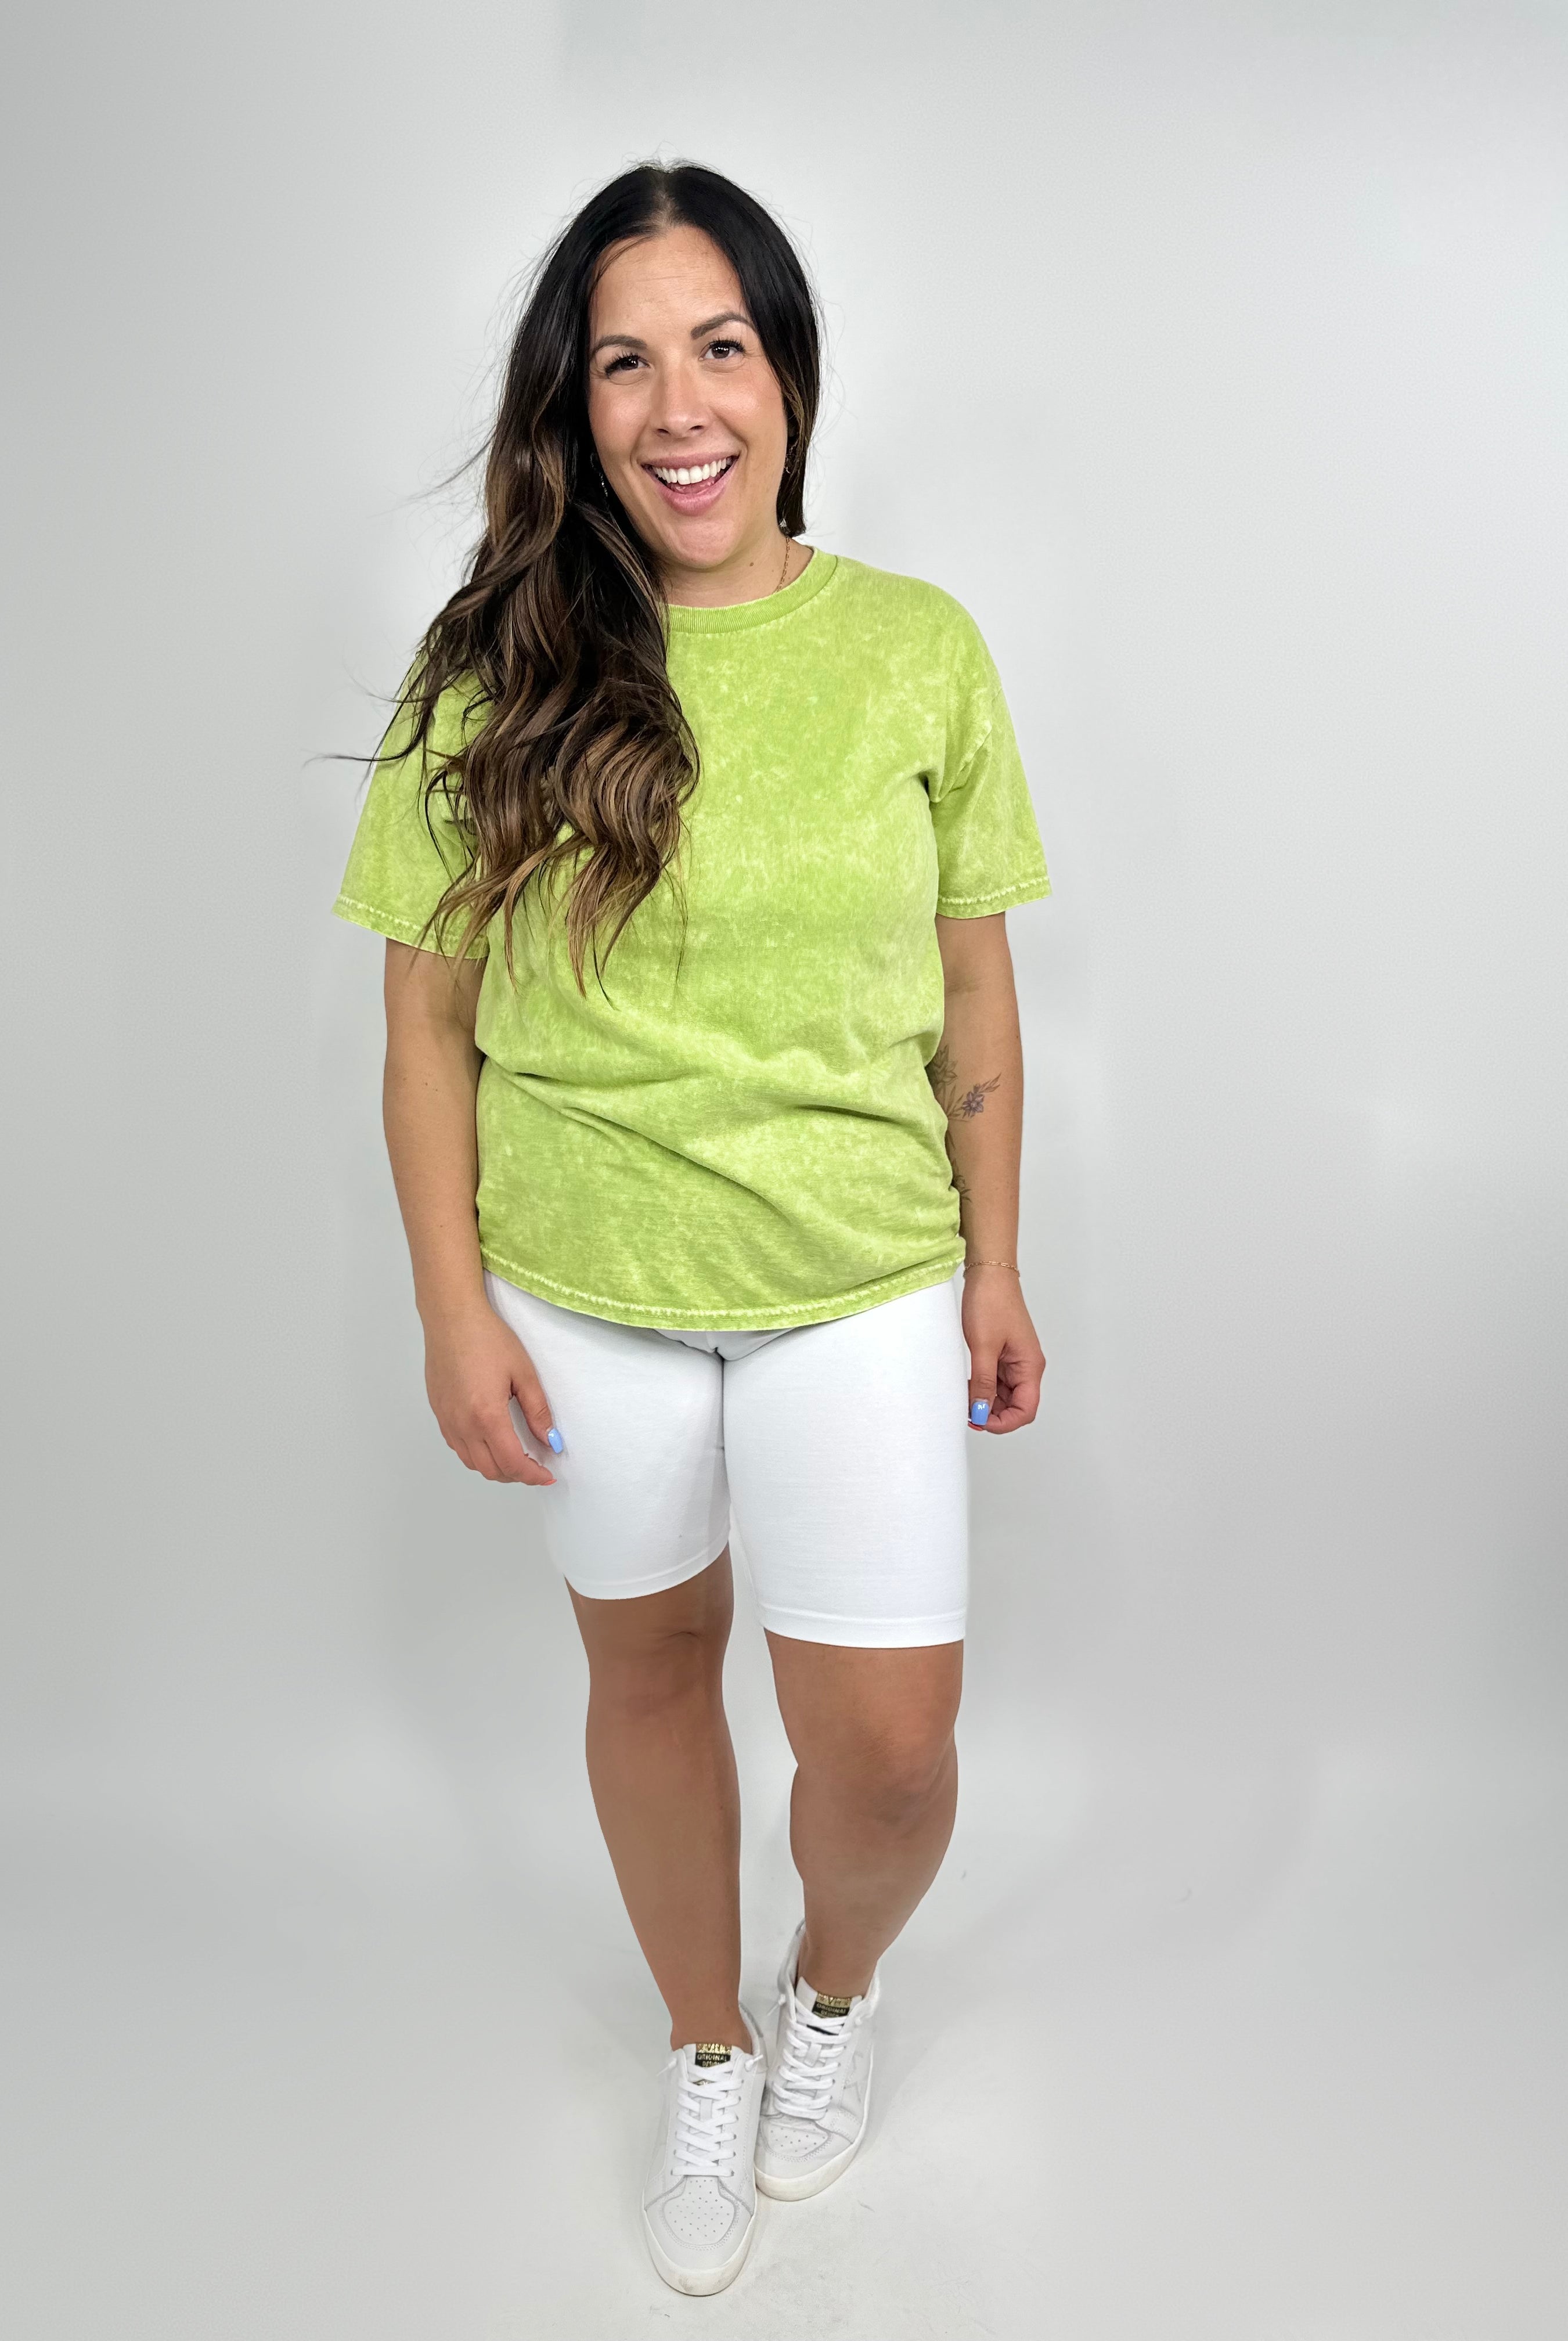 Mineral Chic Top-110 Short Sleeve Top-J. Her-Heathered Boho Boutique, Women's Fashion and Accessories in Palmetto, FL